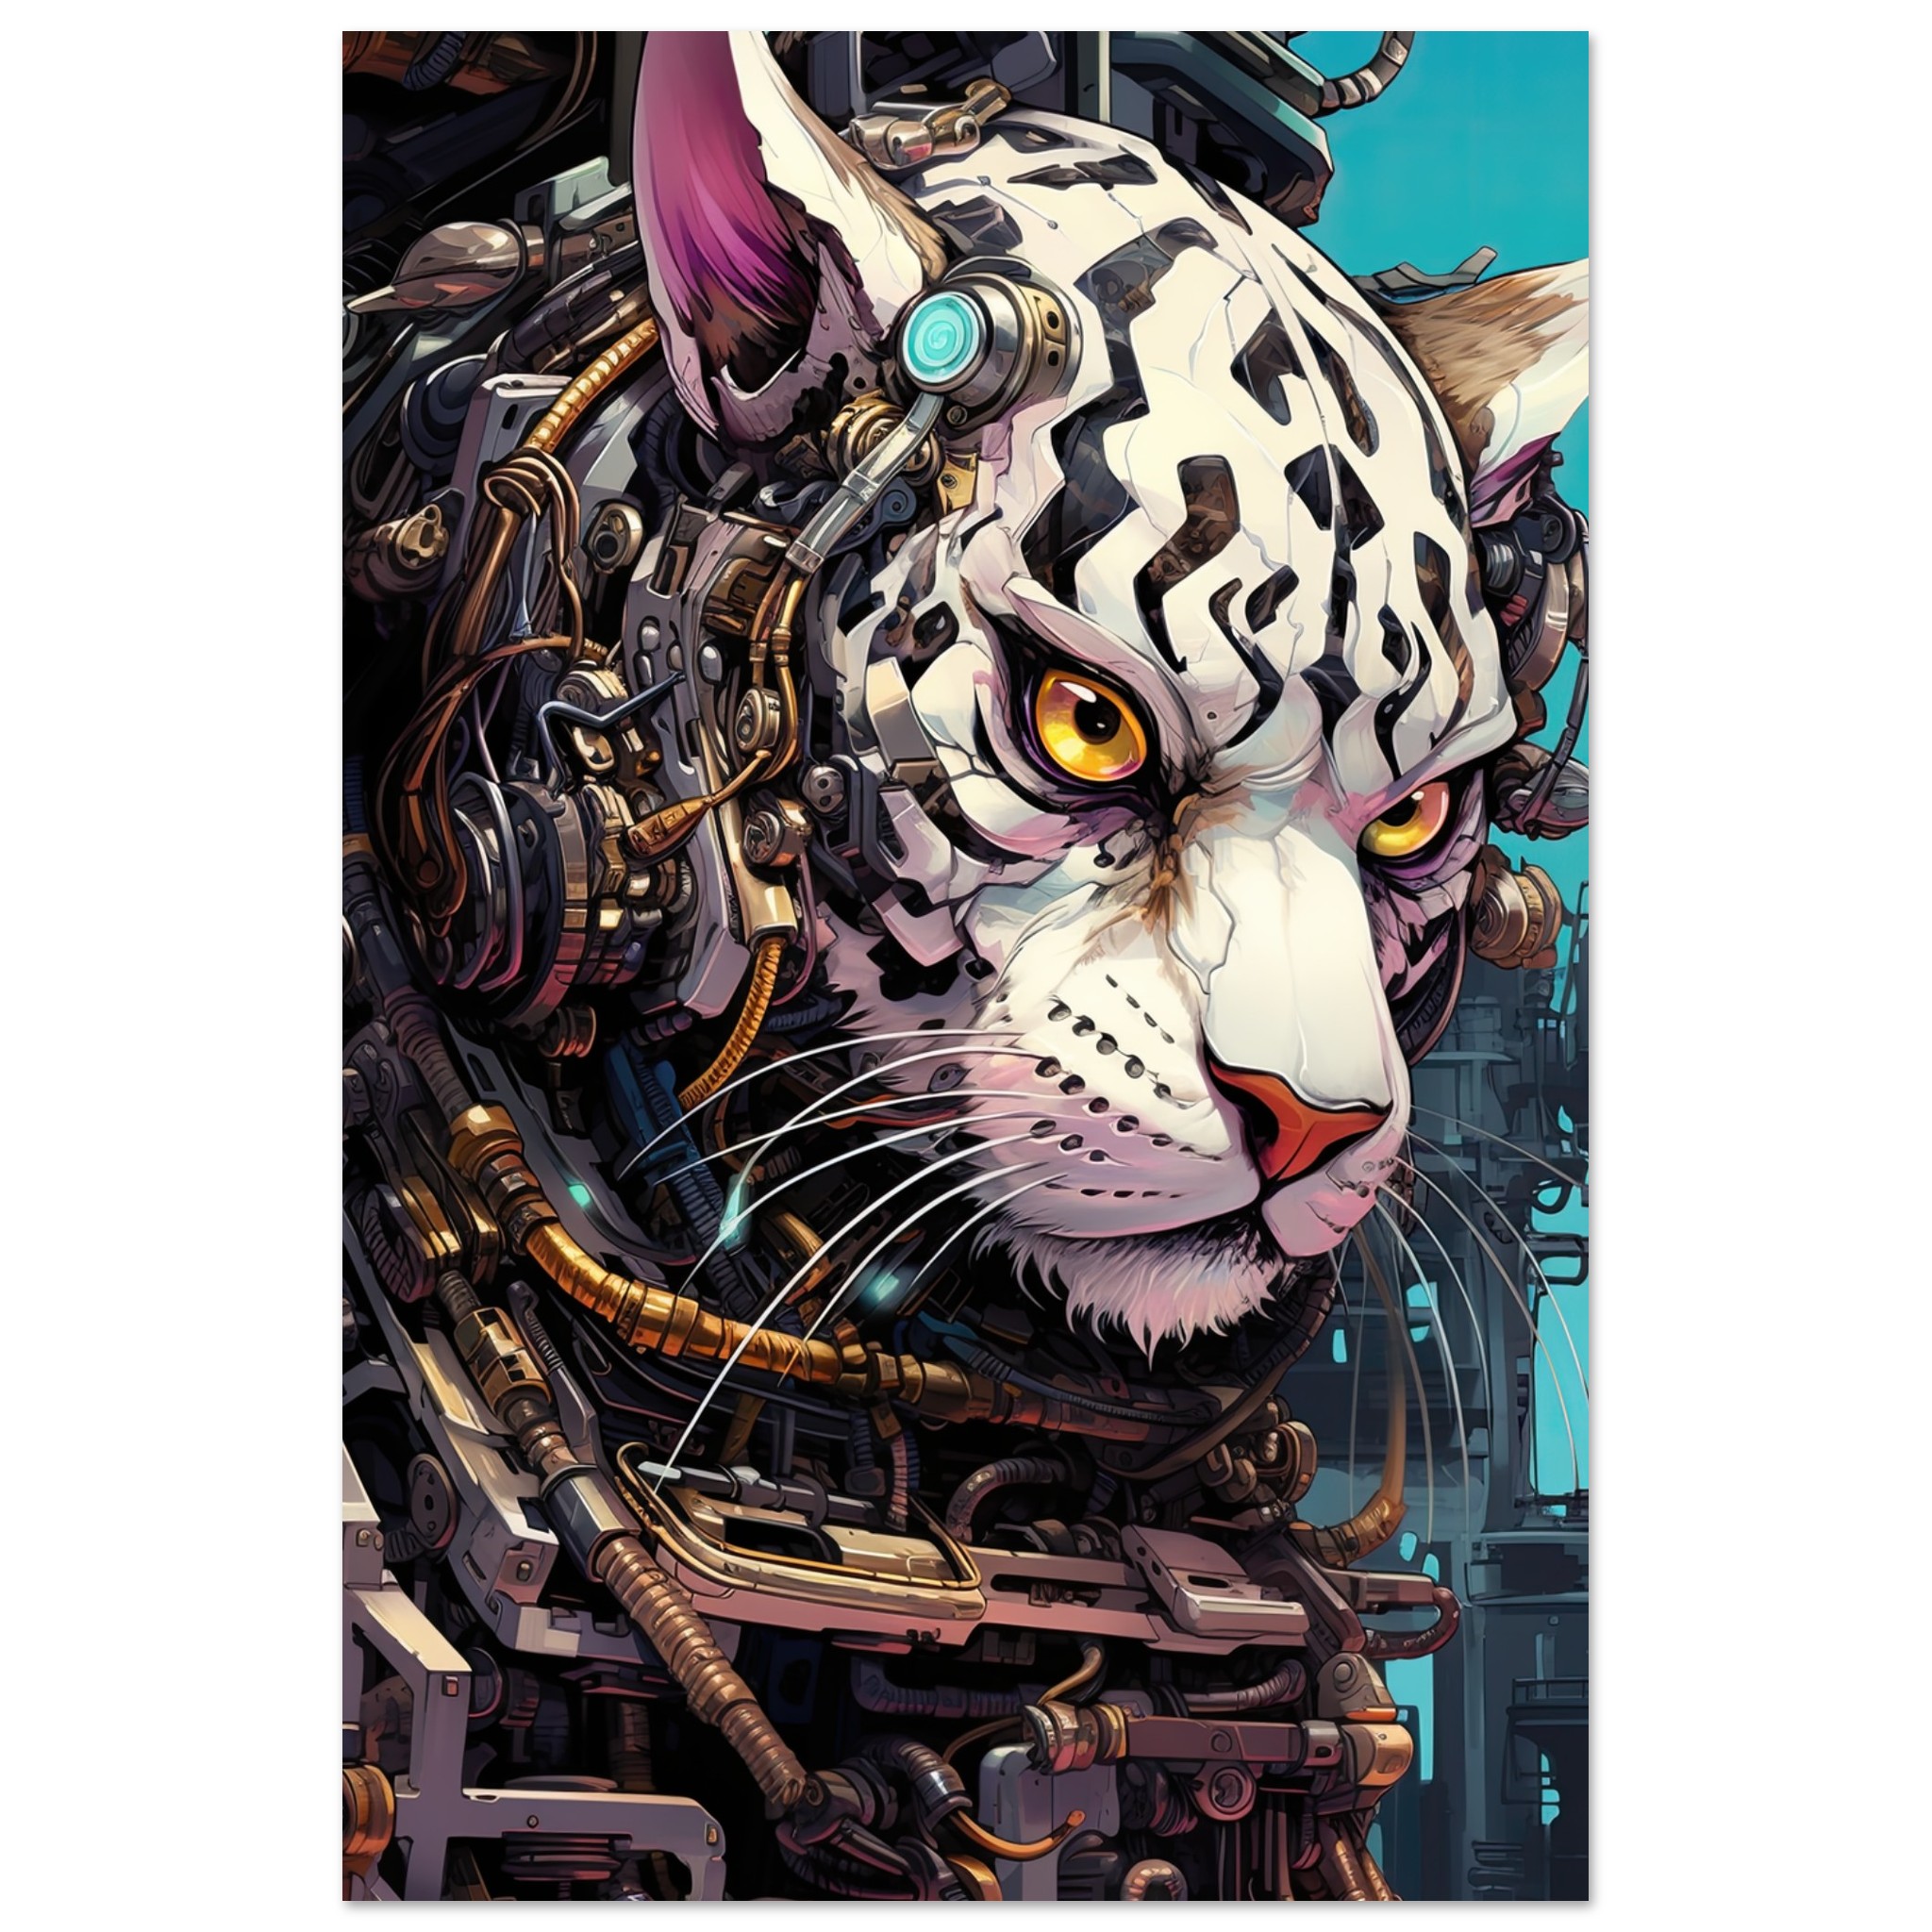 Cybernetic White Tiger Poster – 30×45 cm / 12×18″